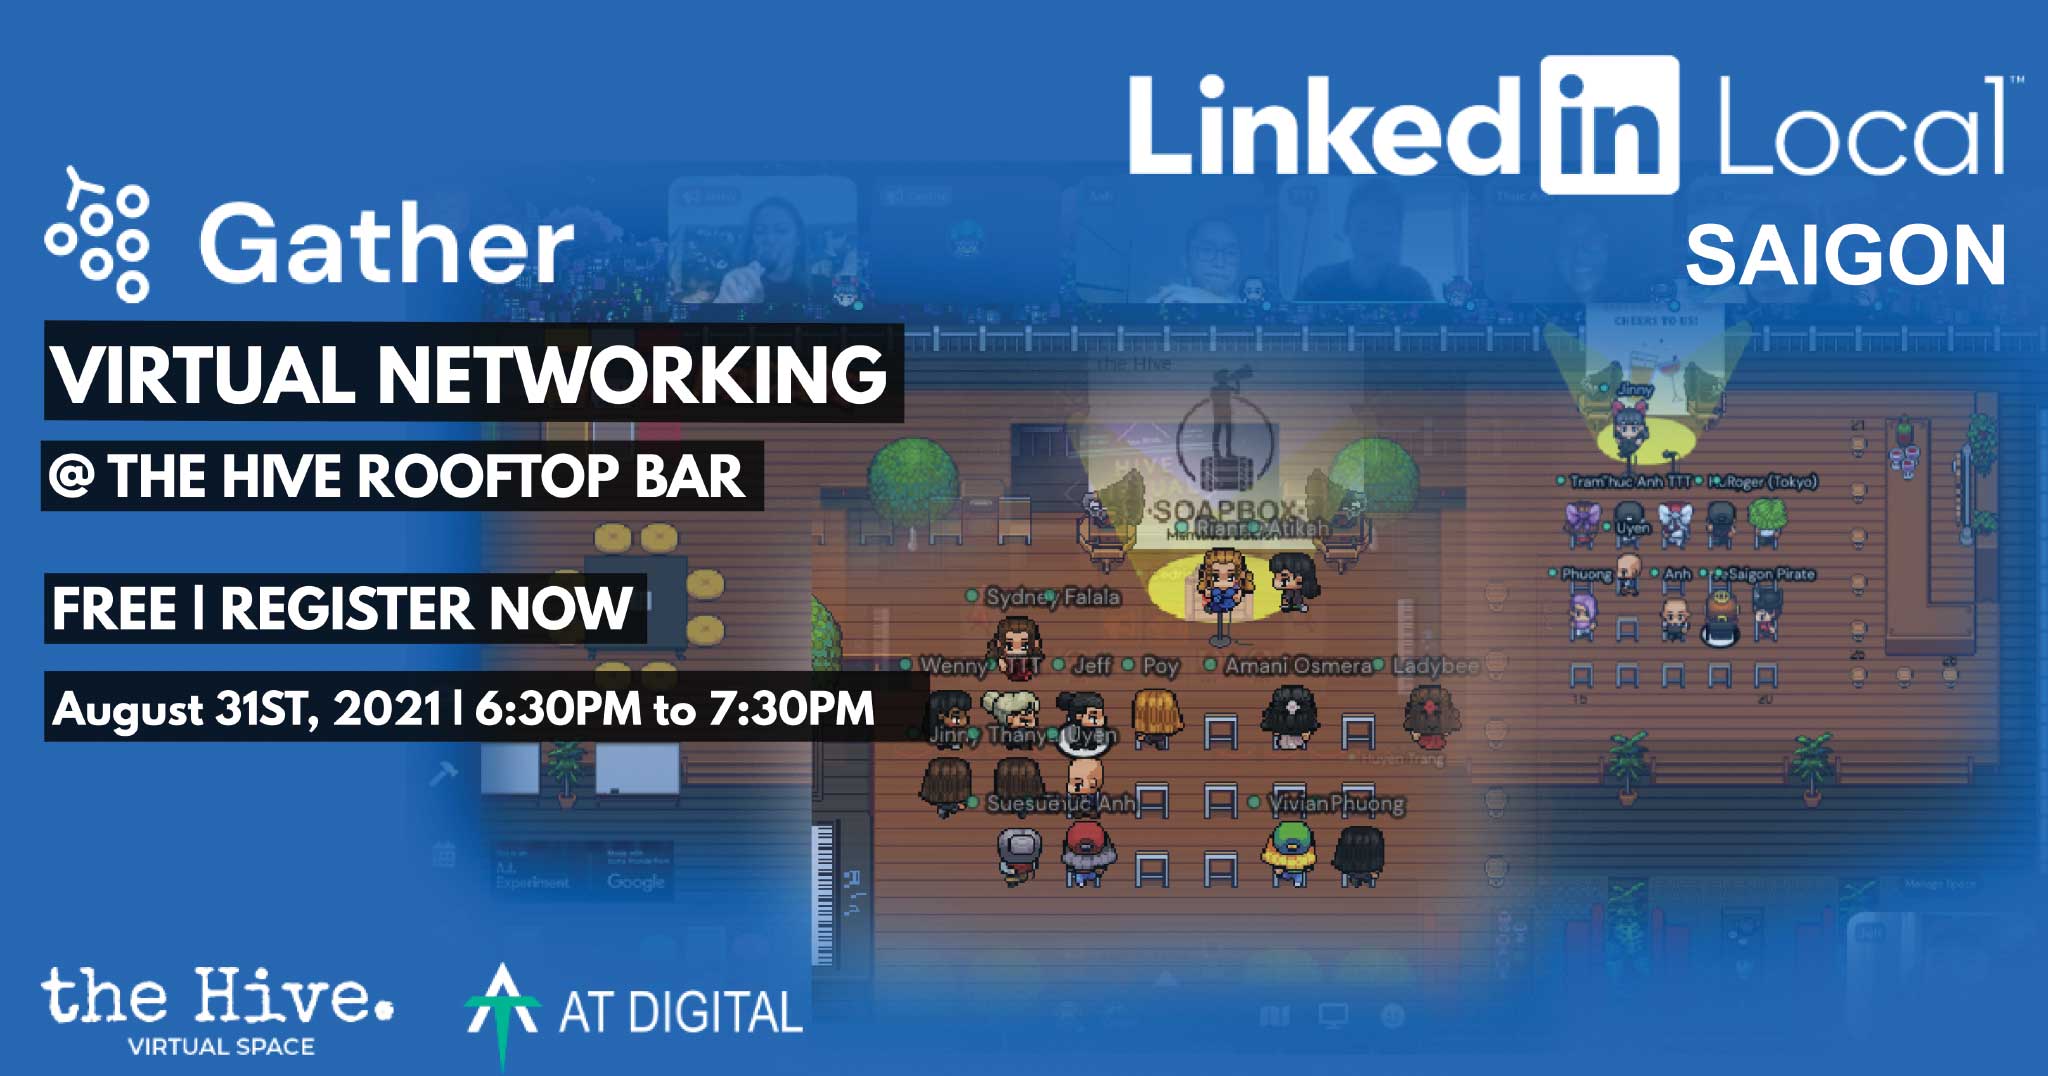 LinkedIn Local Saigon x The Hive virtual networking event on August 31